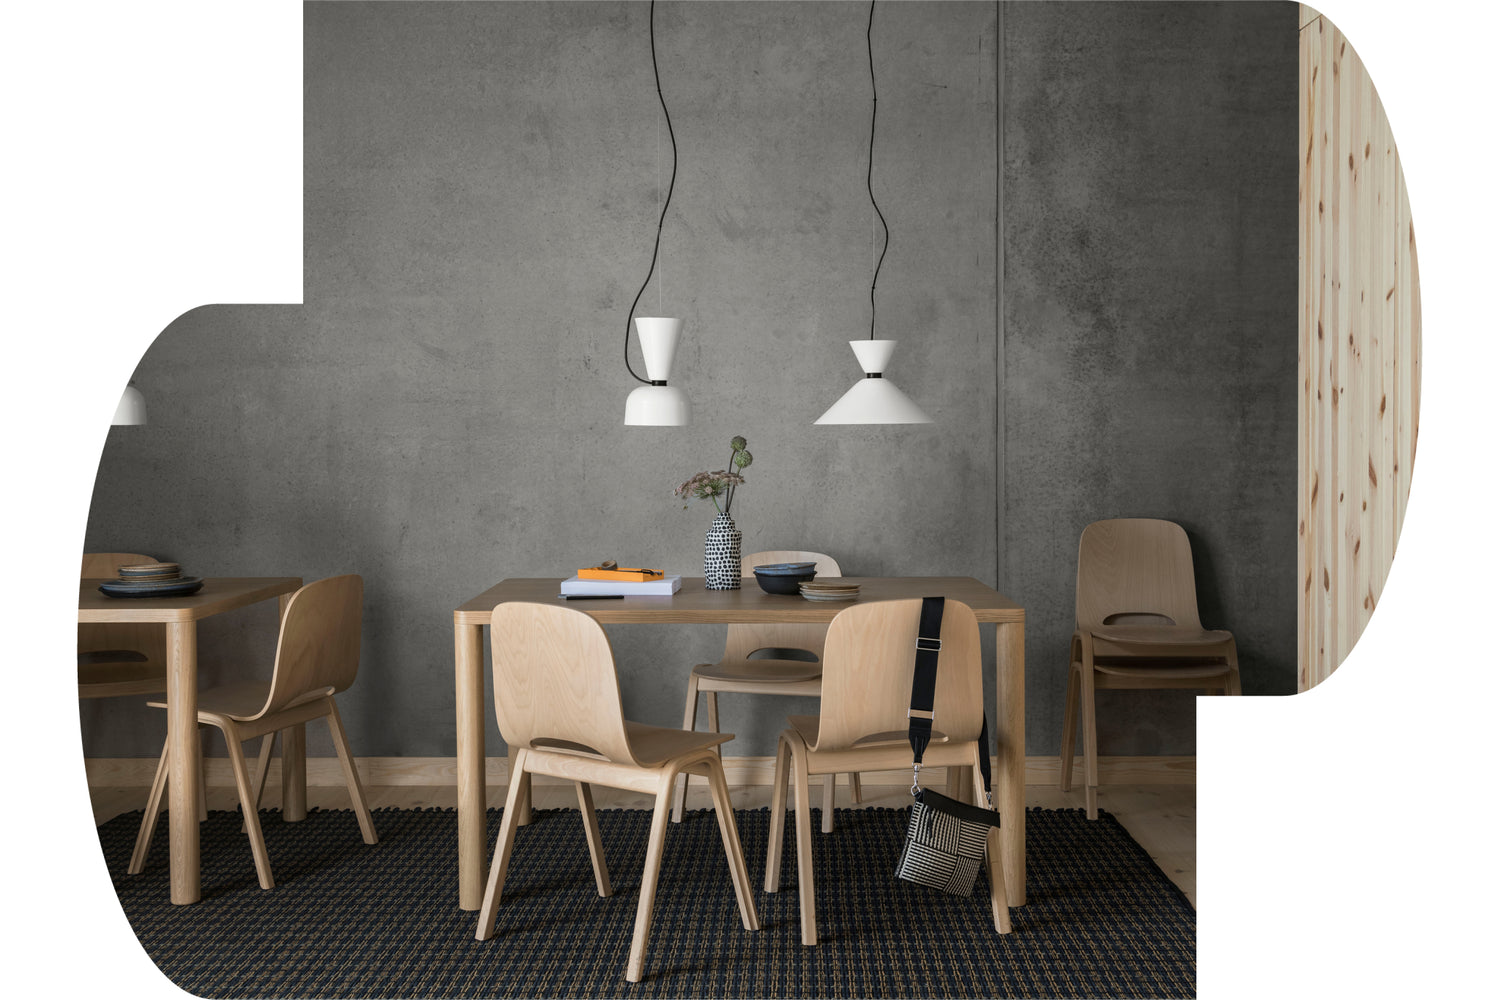 Hem - A lifestyle image featuring Log Table, Touchwood Chair, Alphabeta Pendant Light Duet, and Rope Rug.